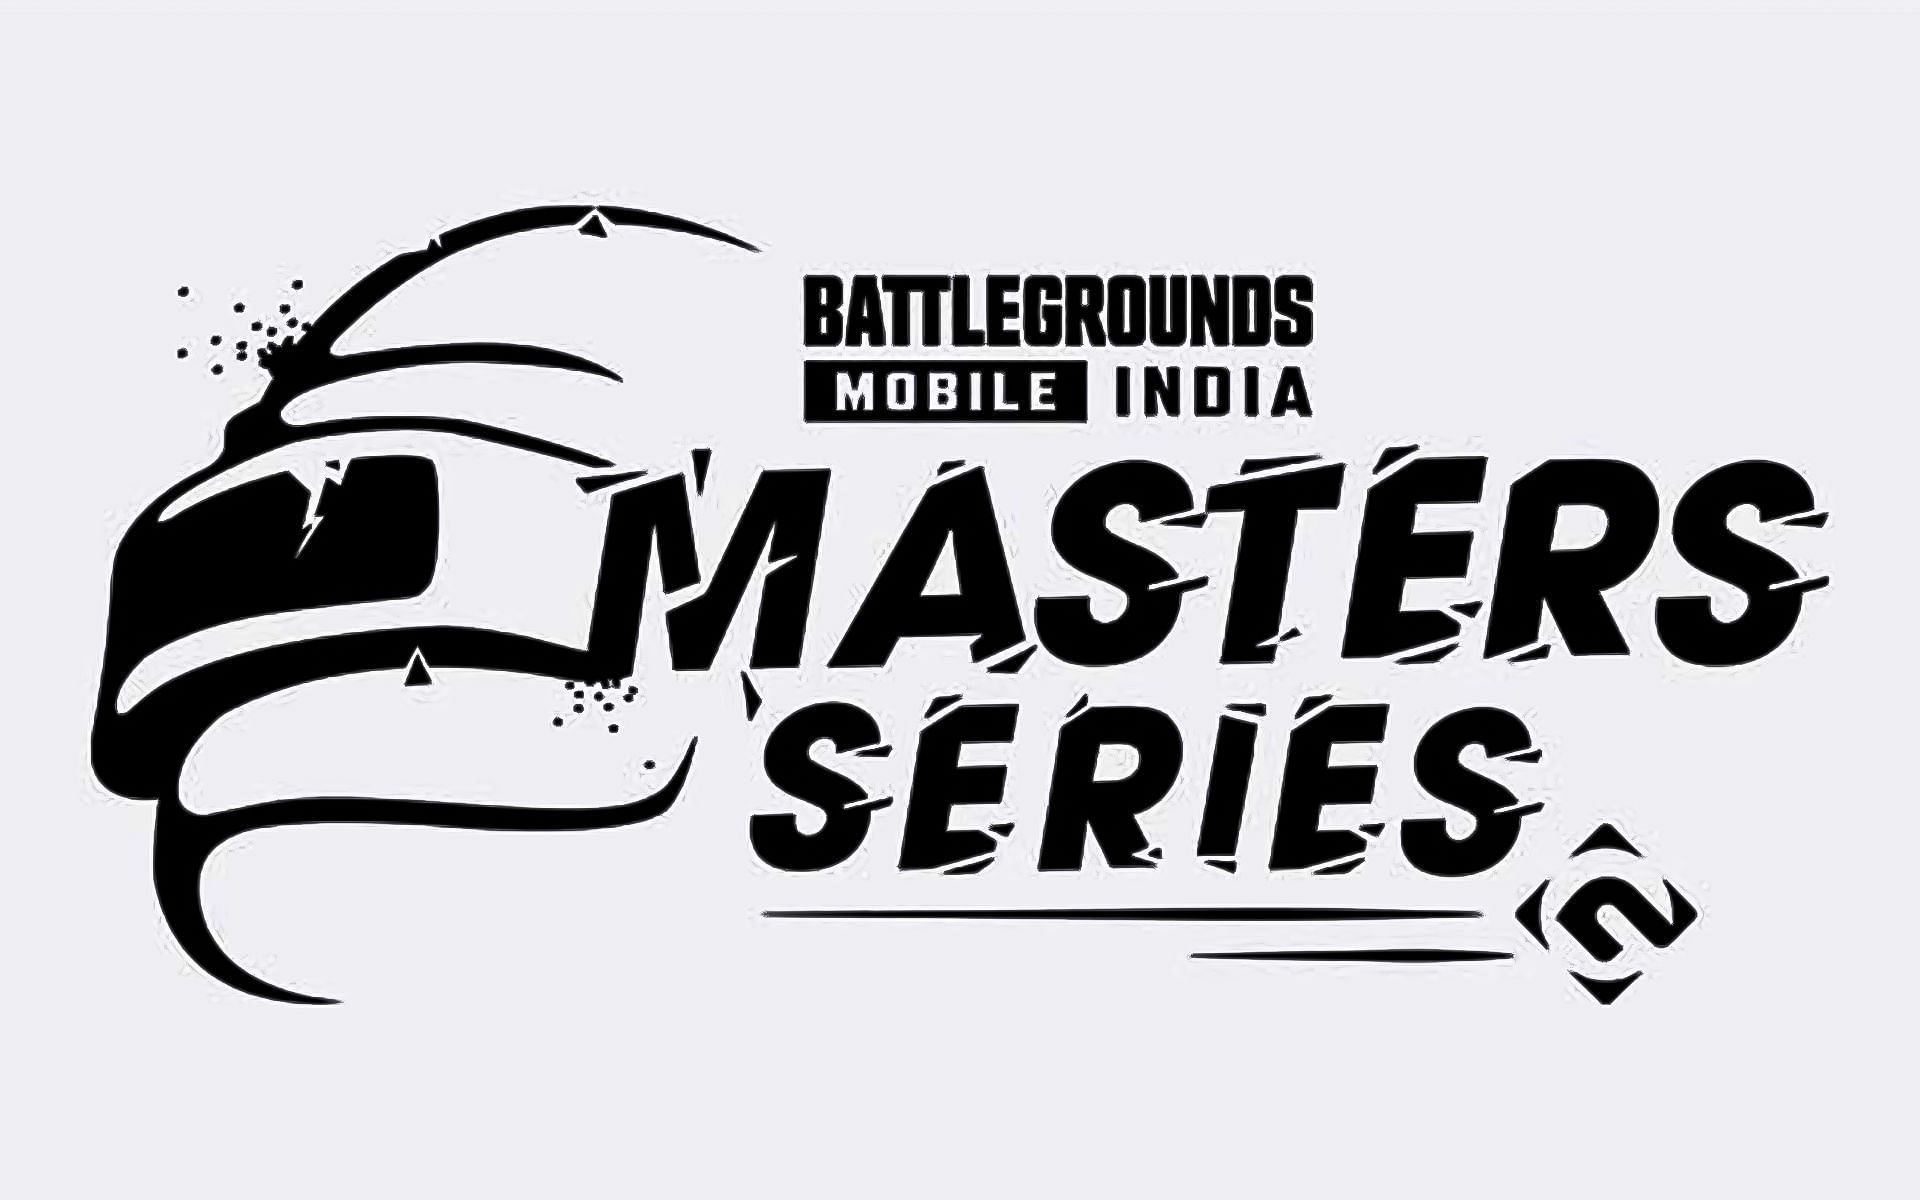 Star Sports 2 BGMI tournament telecast schedule and daily timings (Masters Series)